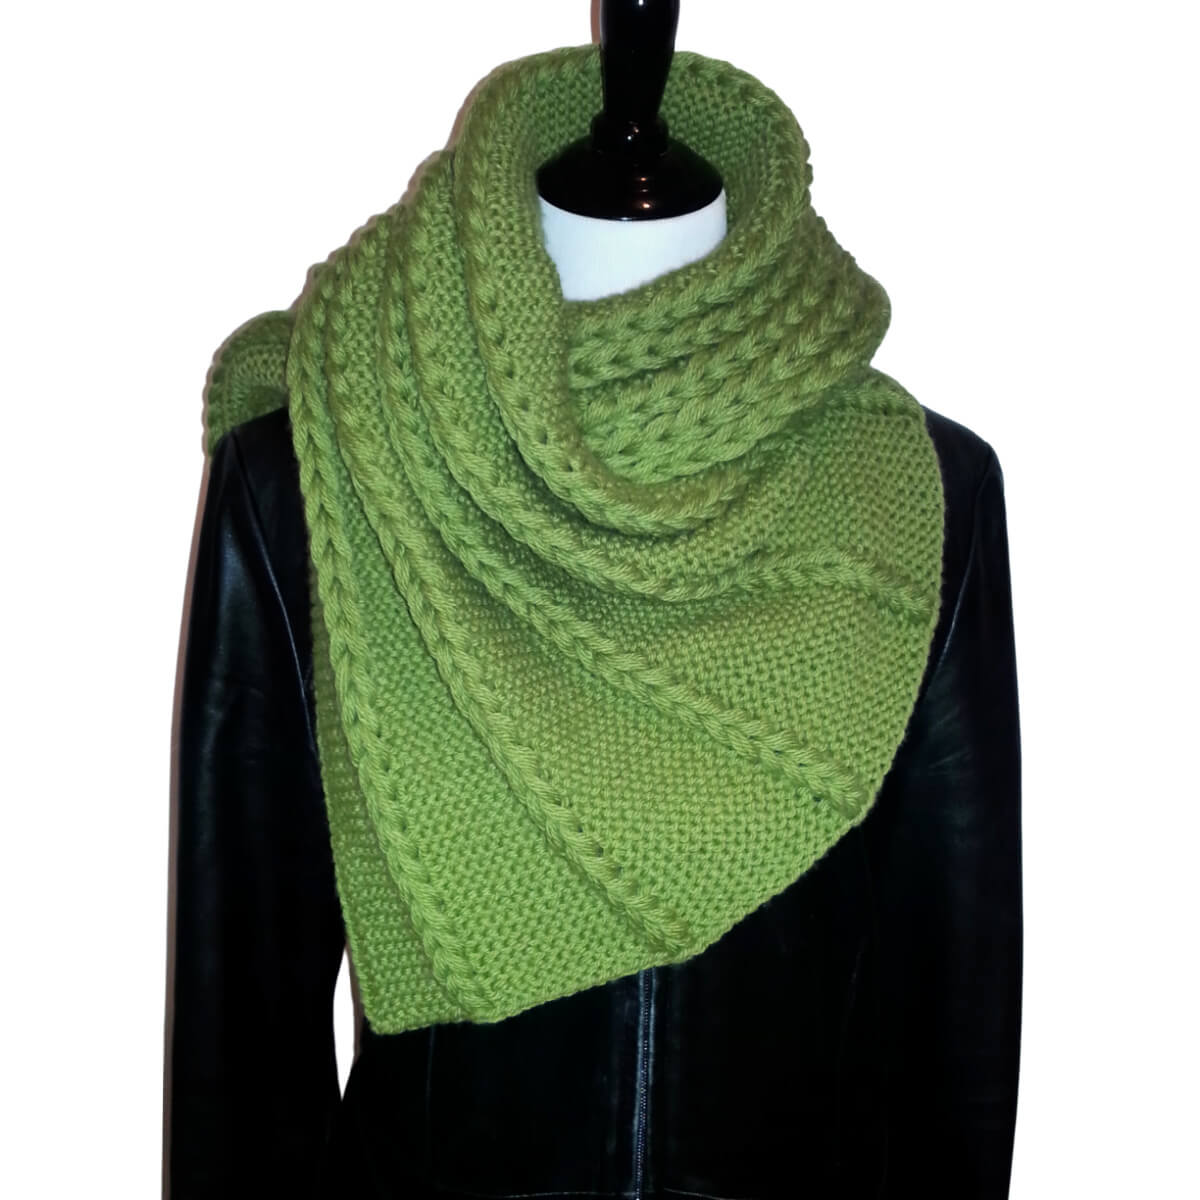 A dress form in a black leather coat with a rectangular shawl wrapped and tucked around it. The yarn is grass green and knit in the garter stitch with 5 vertical sections of chunky chains made with several strands of yarn in each chain.